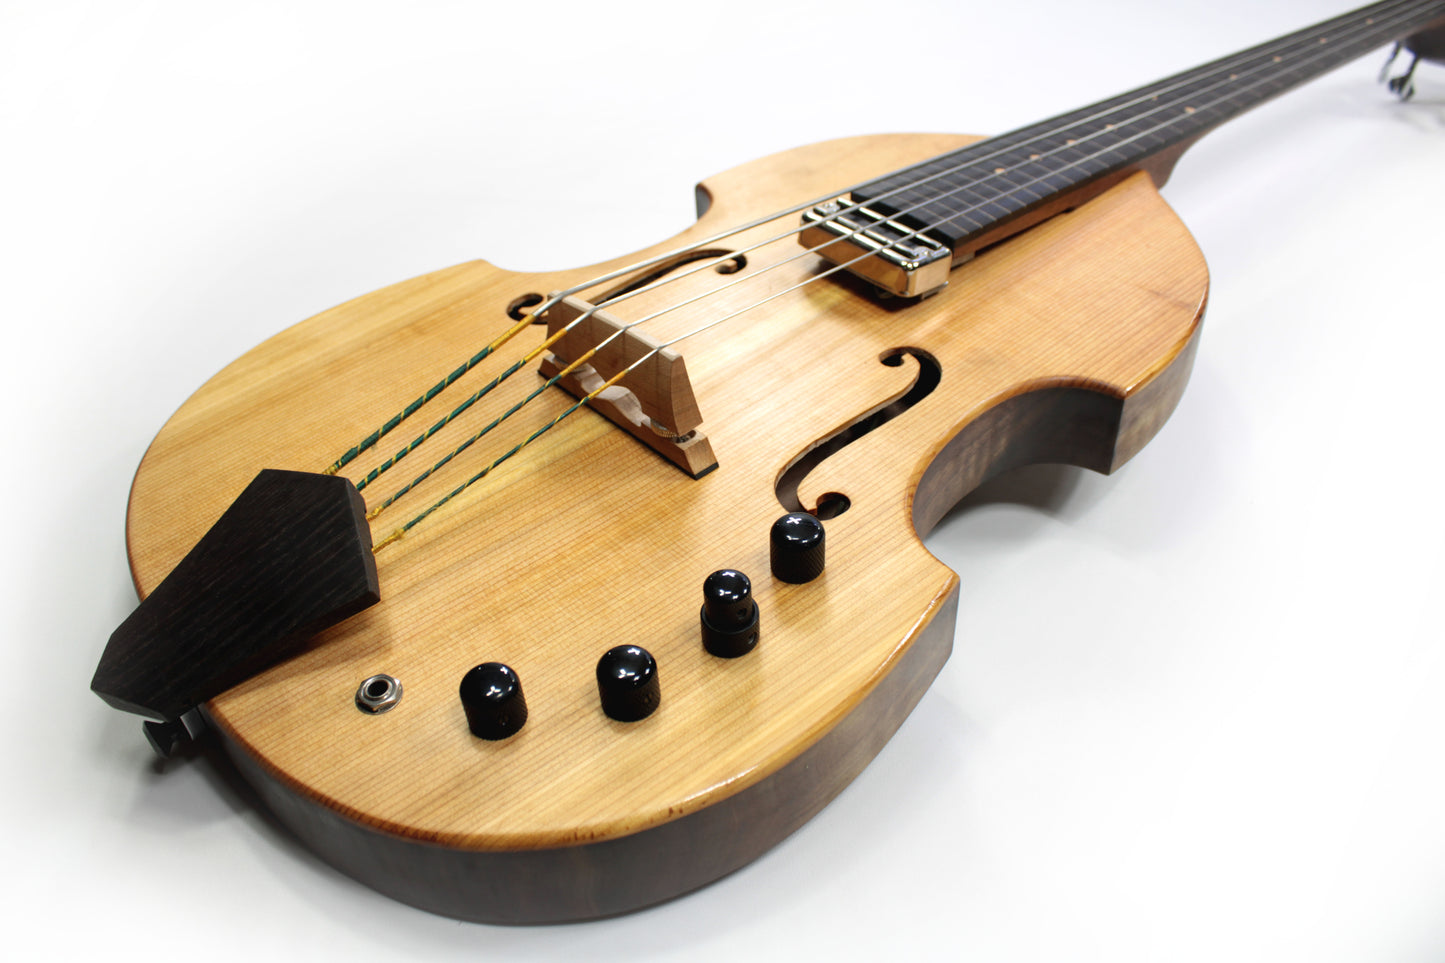 Peters Hybrid Bass, Upright tones in a E-bass package. Handmade in the USA